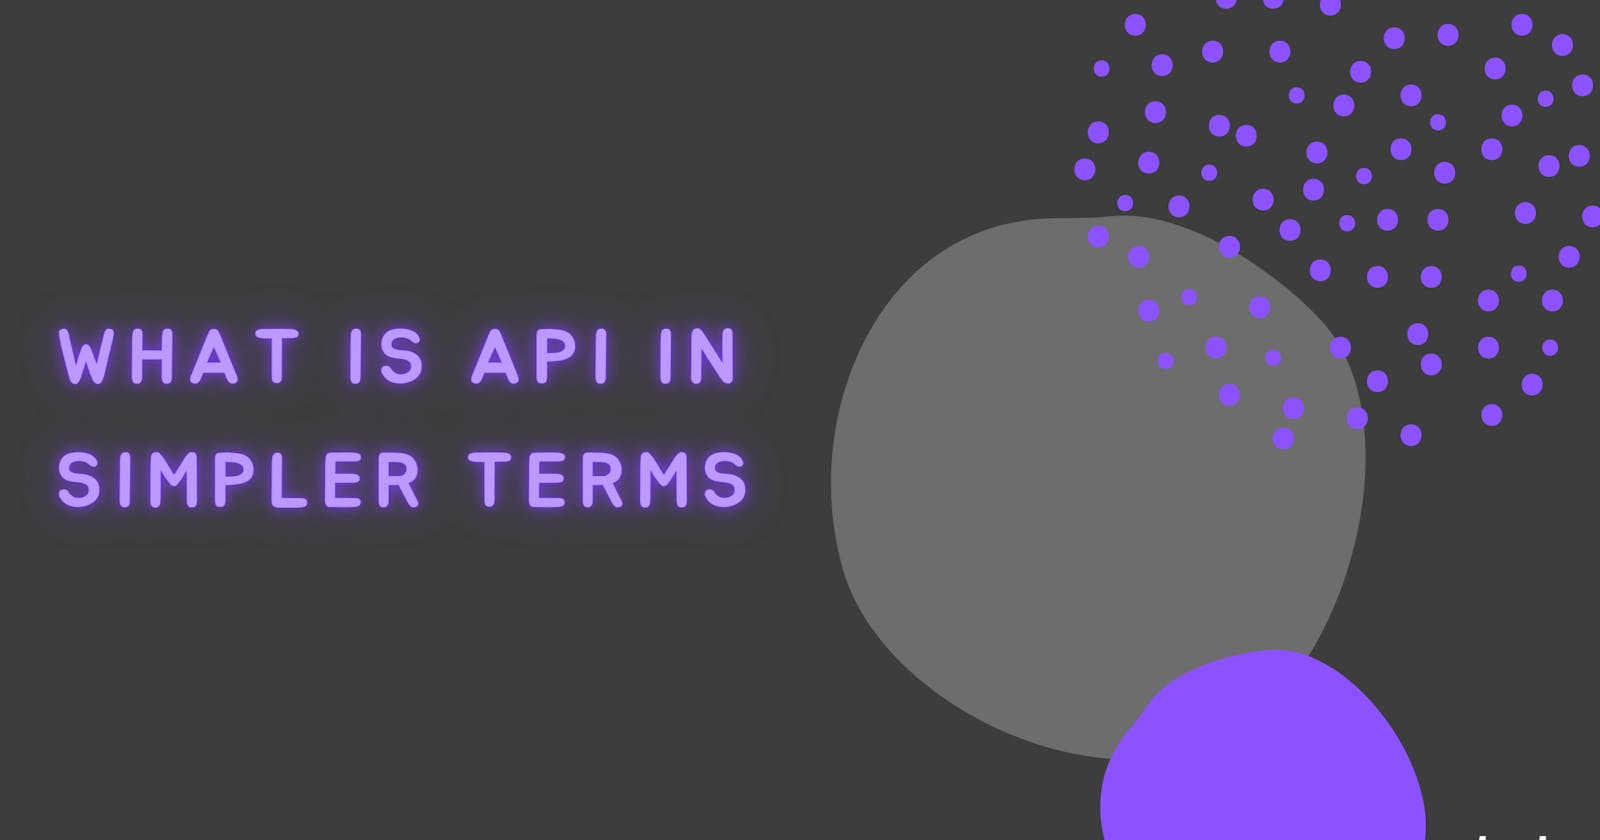 What is API in simpler terms?